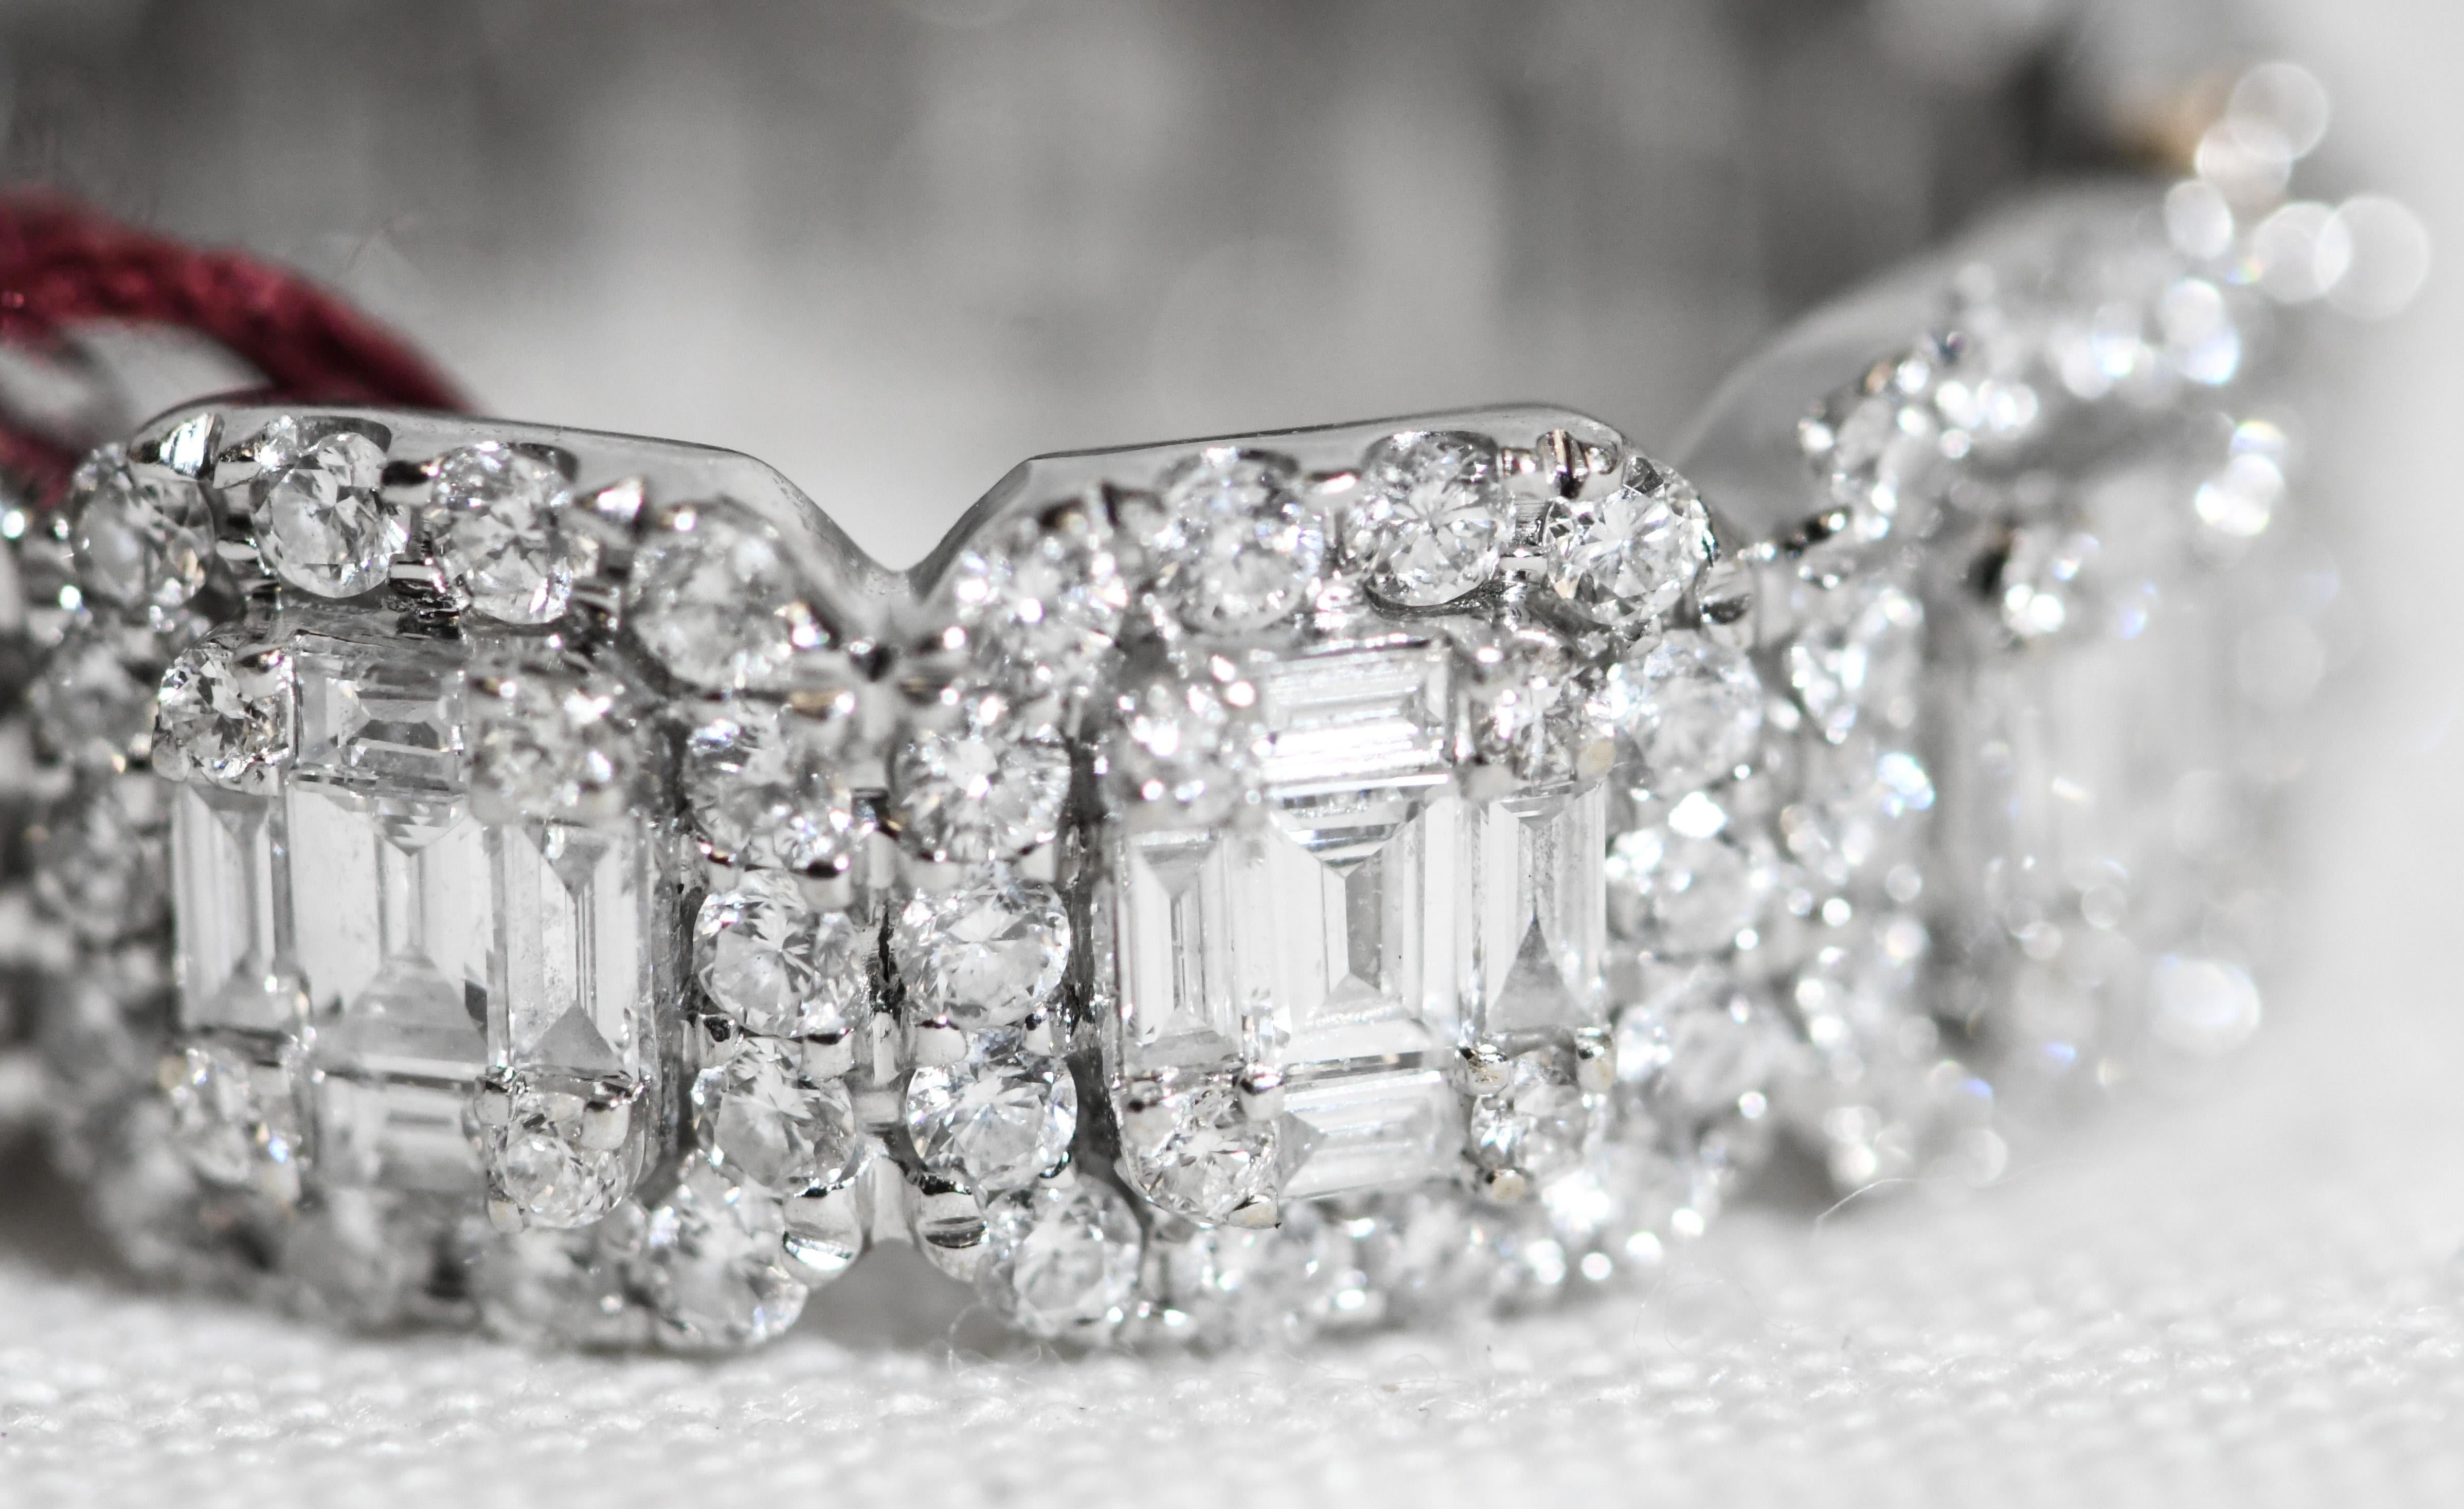 Meticulously crafted in 18 karat white gold, this stunning Eternity Band is genius of design.  Each section appears to contain an emerald cut diamond in the center.  Closer inspection reveals each station containing at the center baguette diamonds